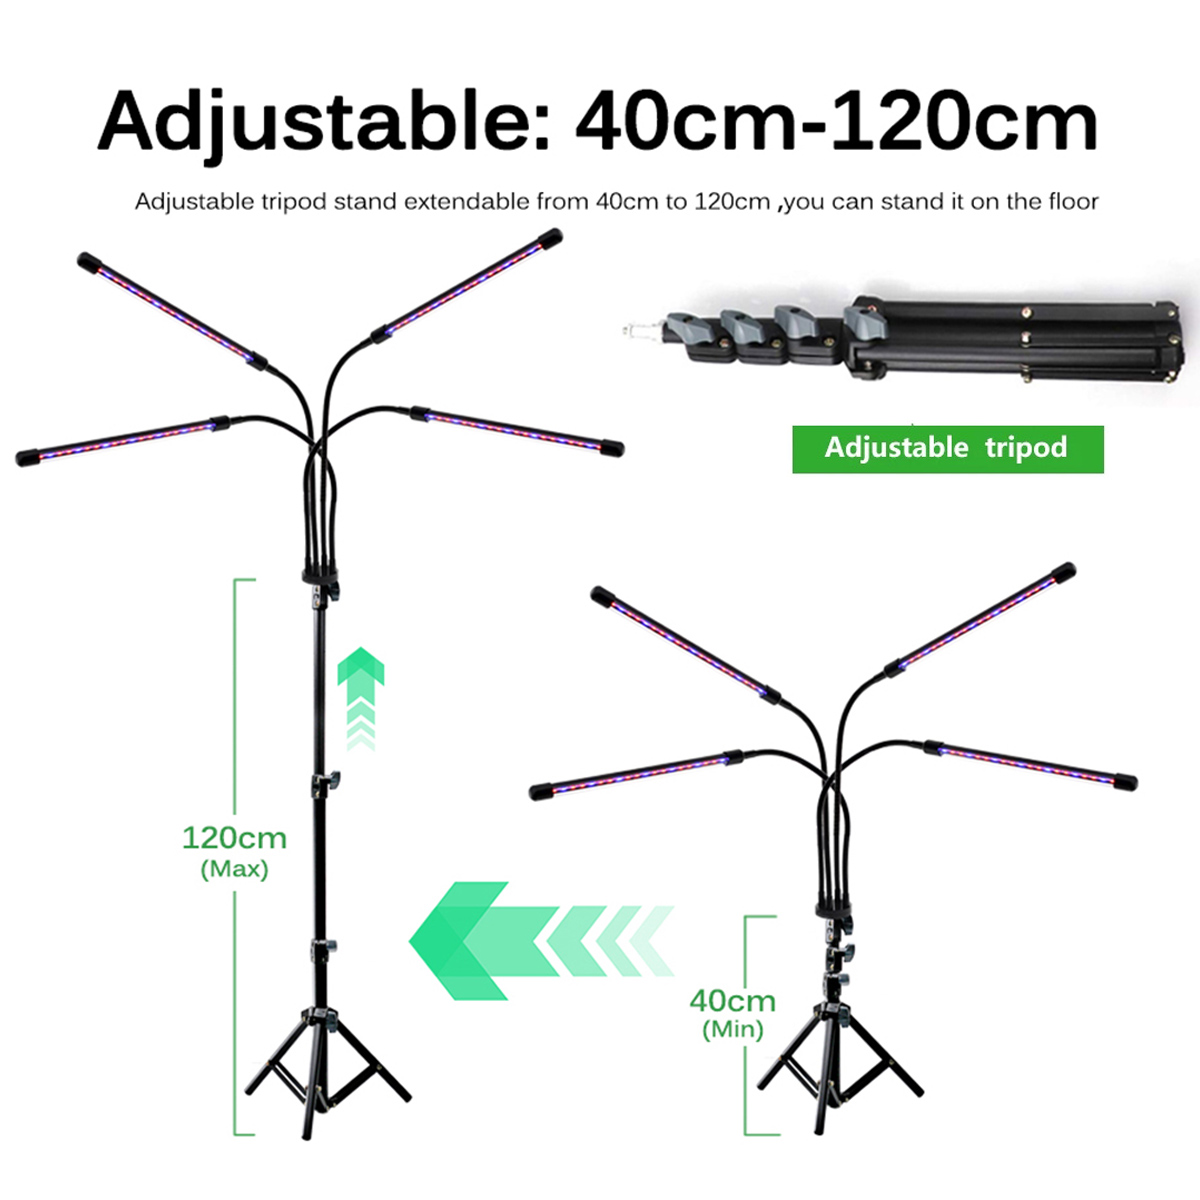 LED-Grow-Light-Tripod-Plant-Growing-Lamp-Lights-With-Tripod-For-Indoor-Plants-1836993-6